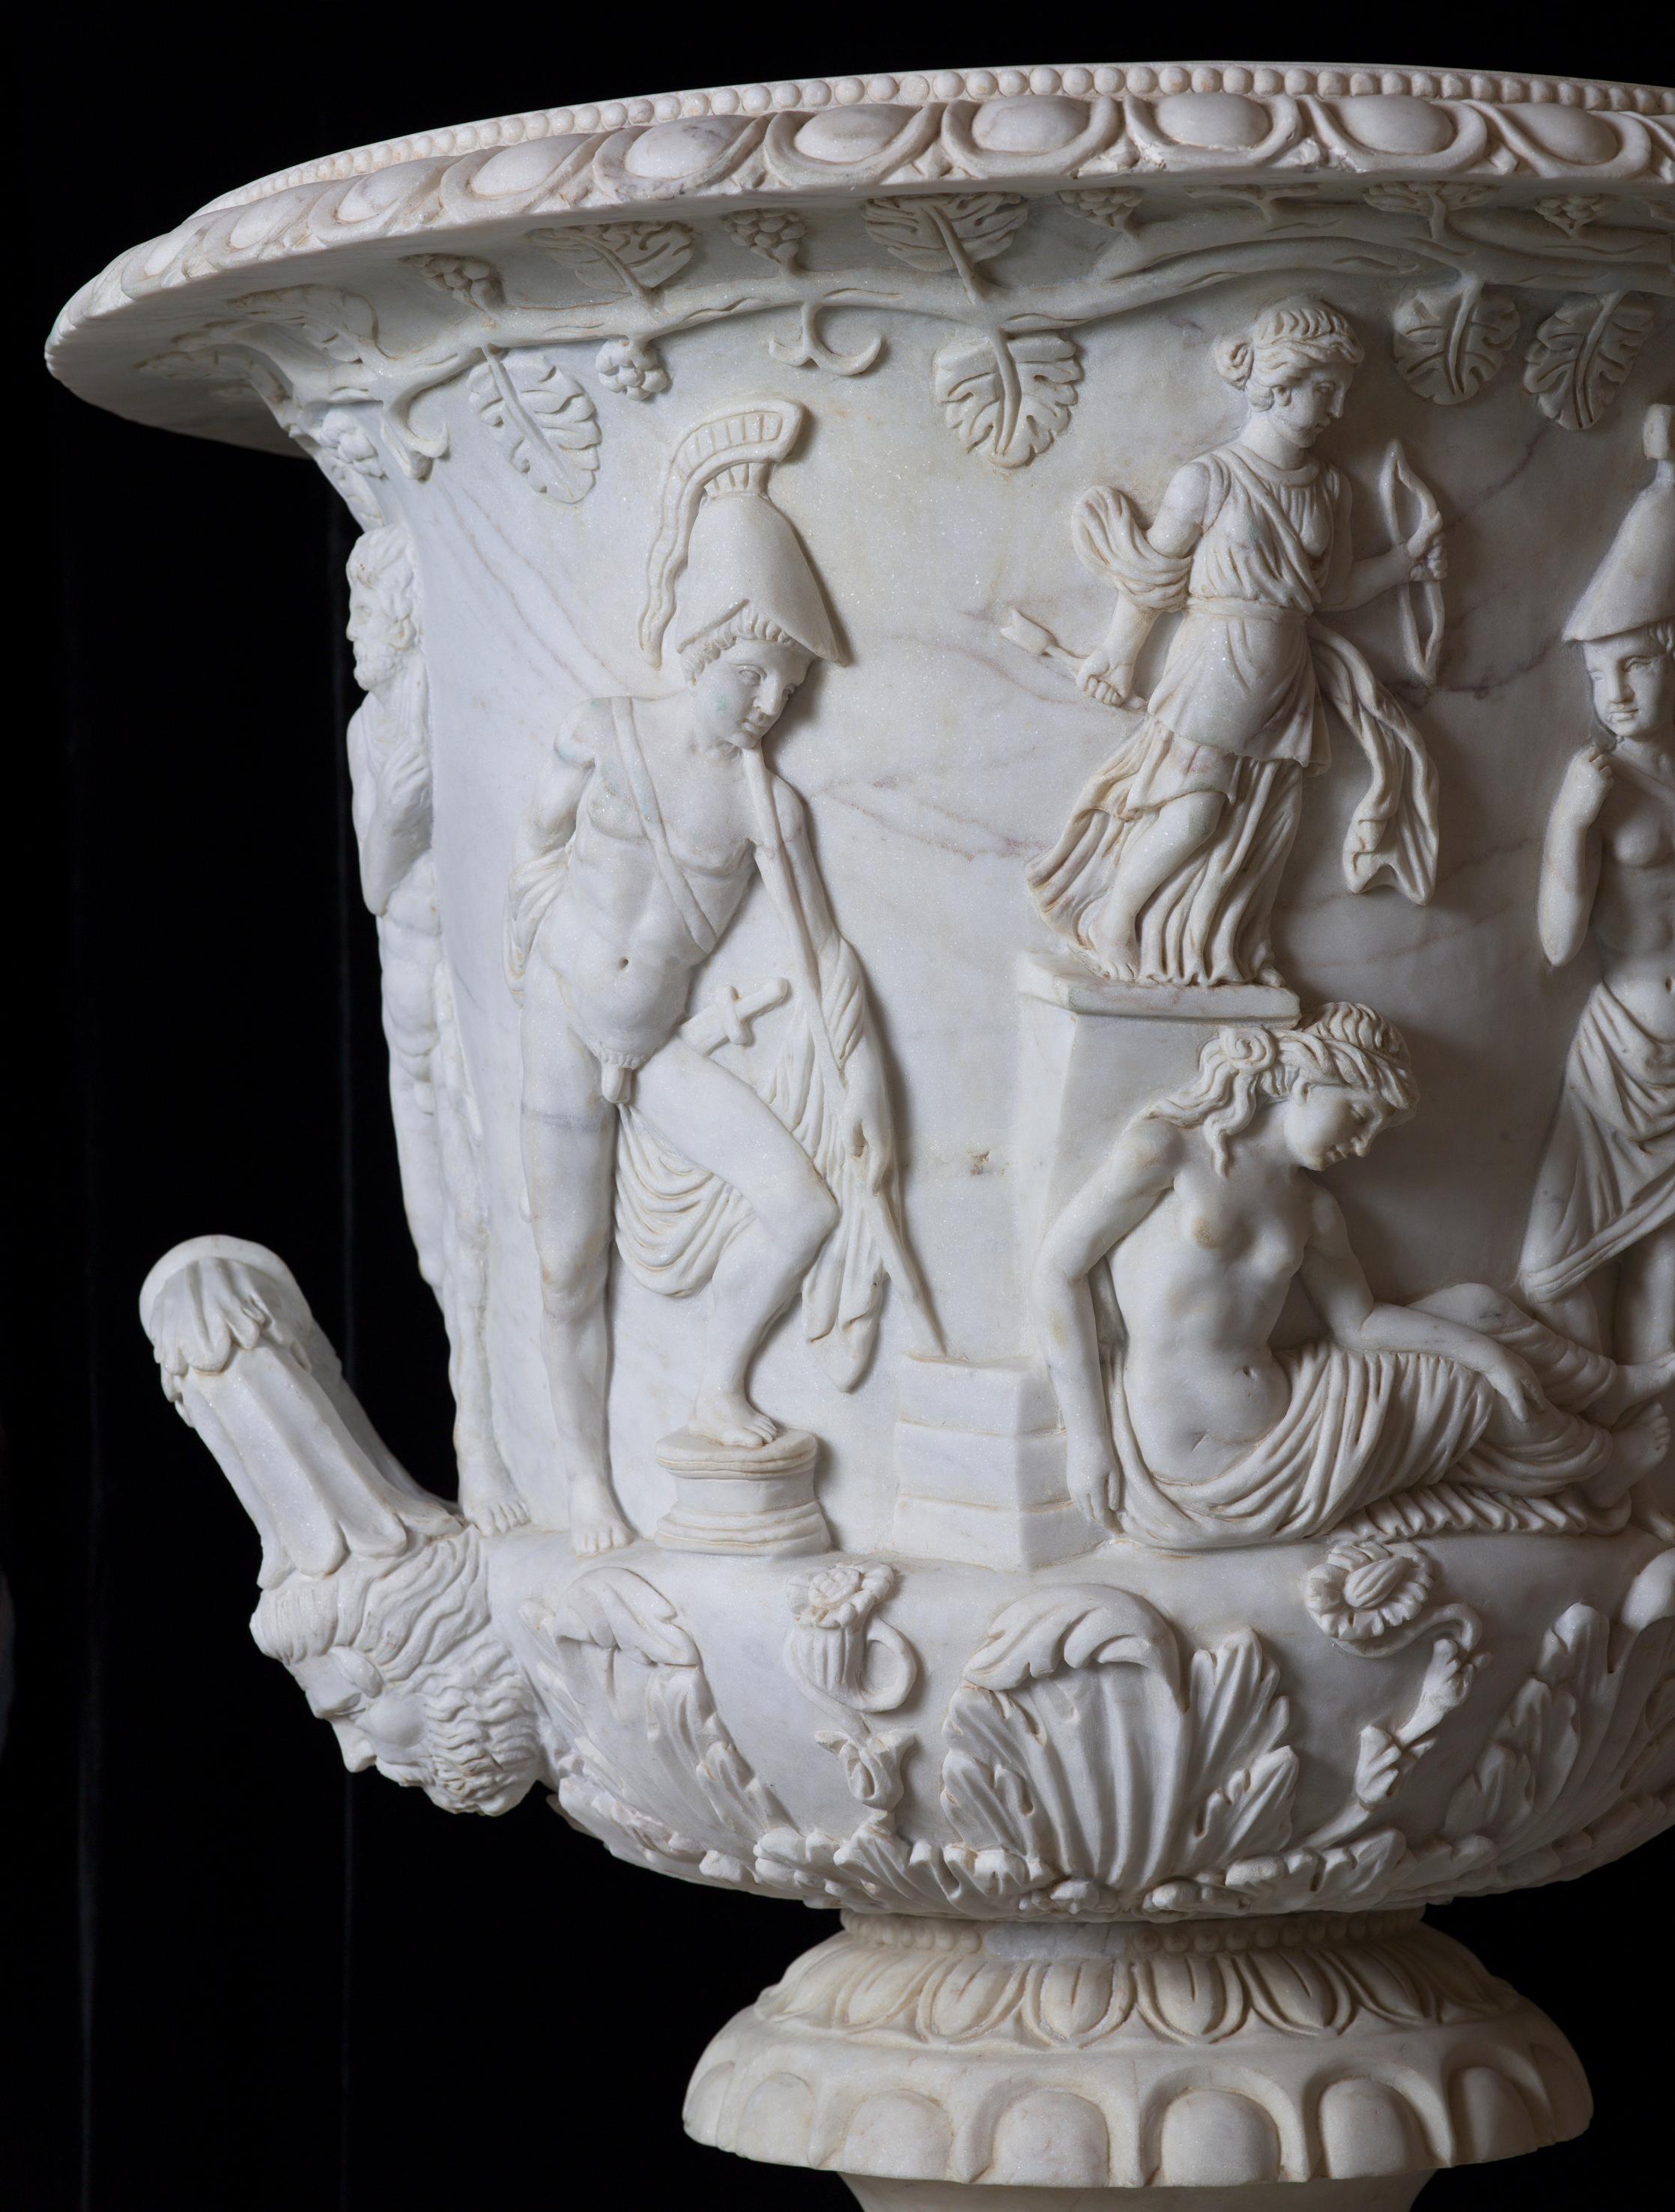 Italian Statuary White Marble Medici Vase after the Classical Greek For Sale 1